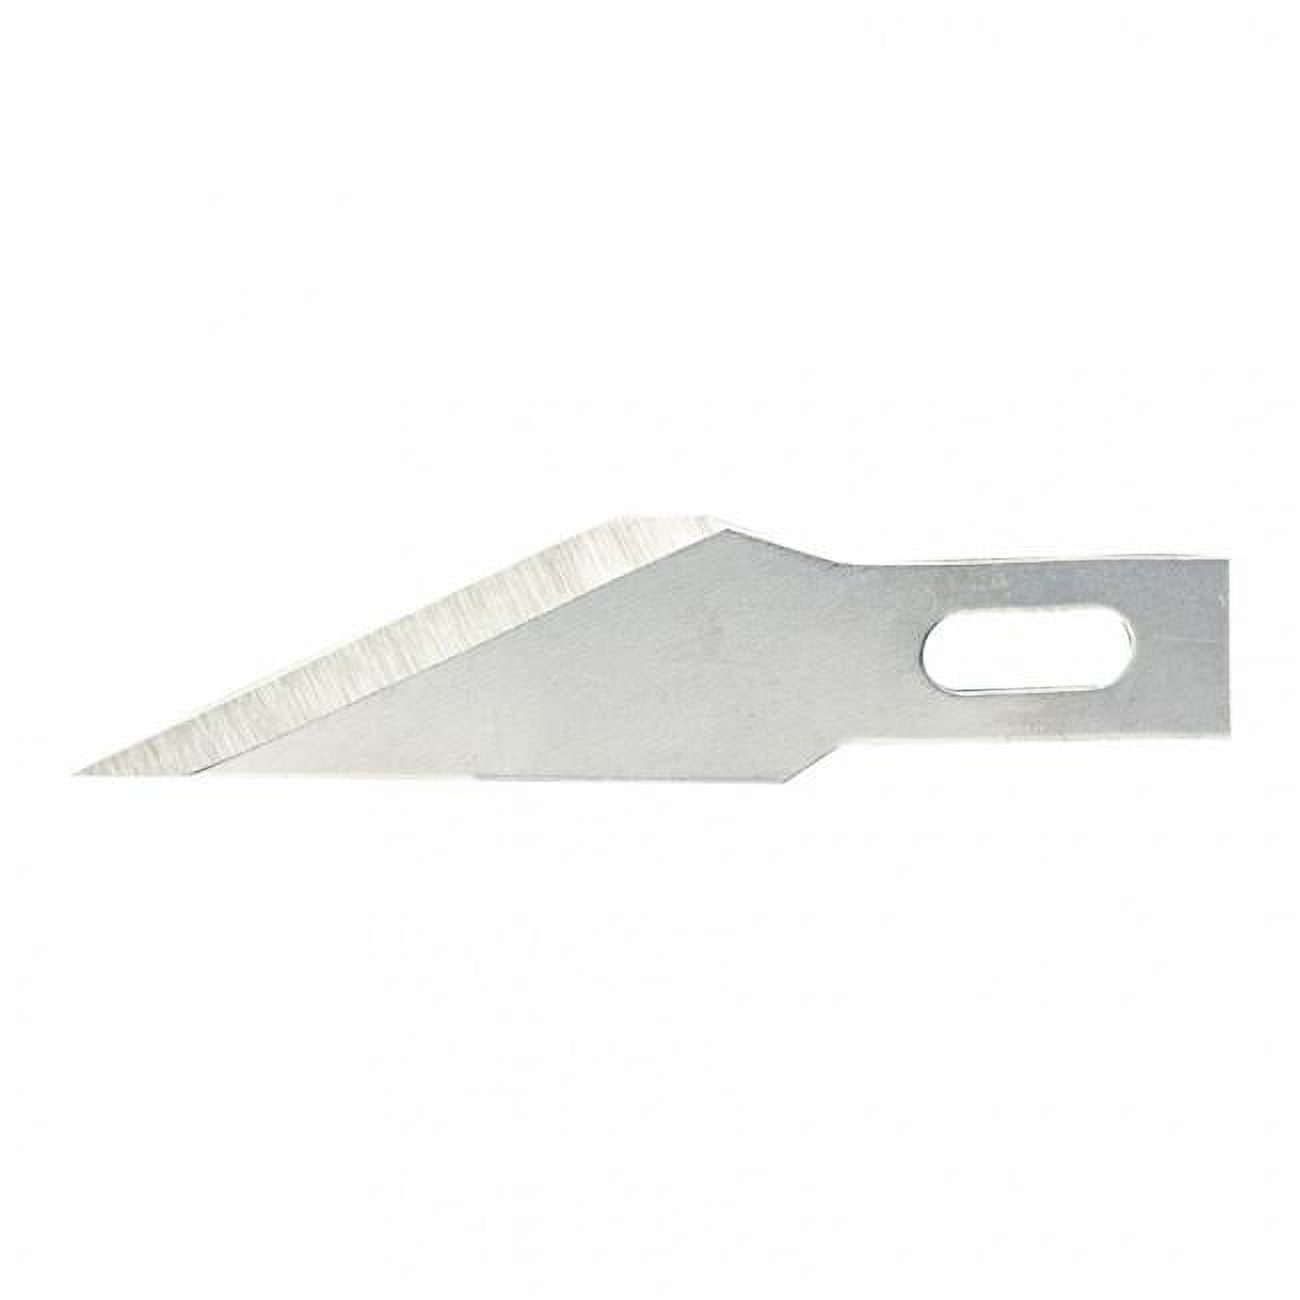 11 Fine Blades For 1 Handle - Pack Of 5